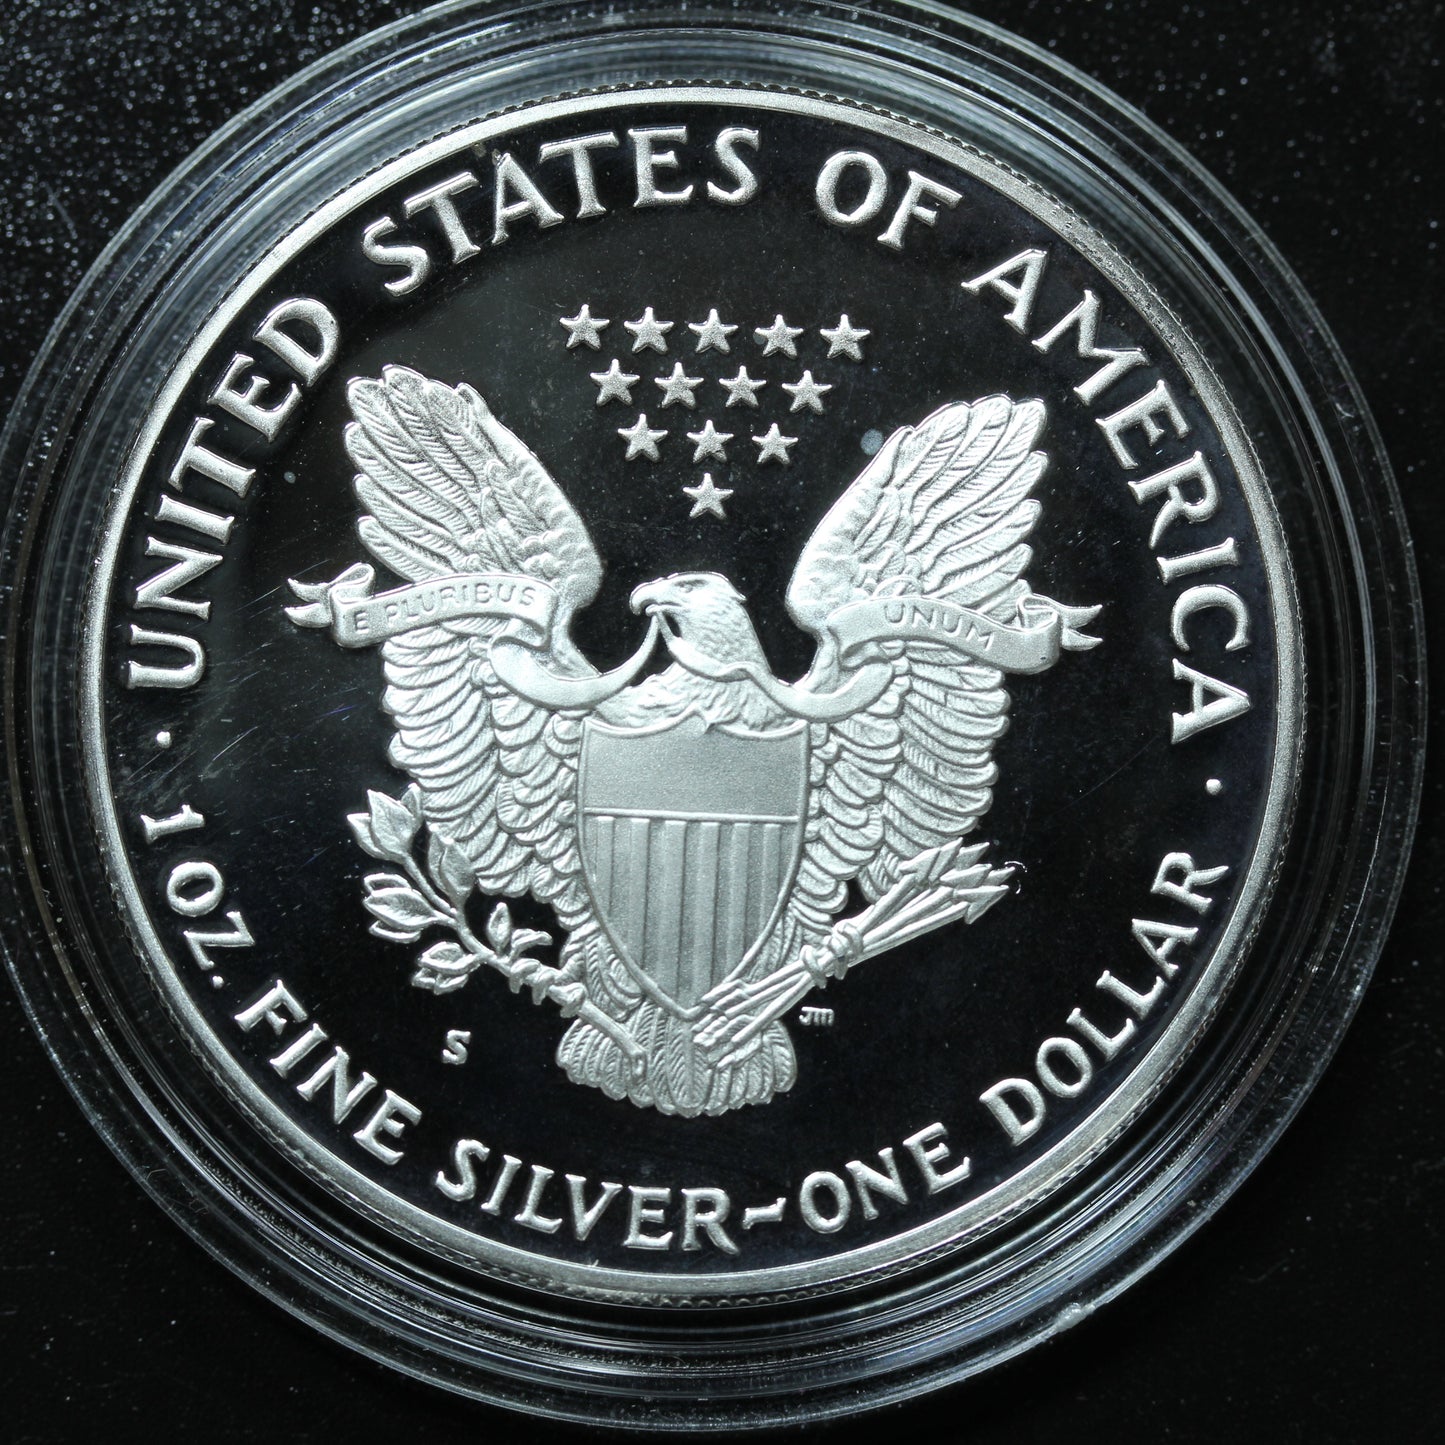 1991 S Proof Silver American Eagle 1 oz Coin Only w/ Capsule